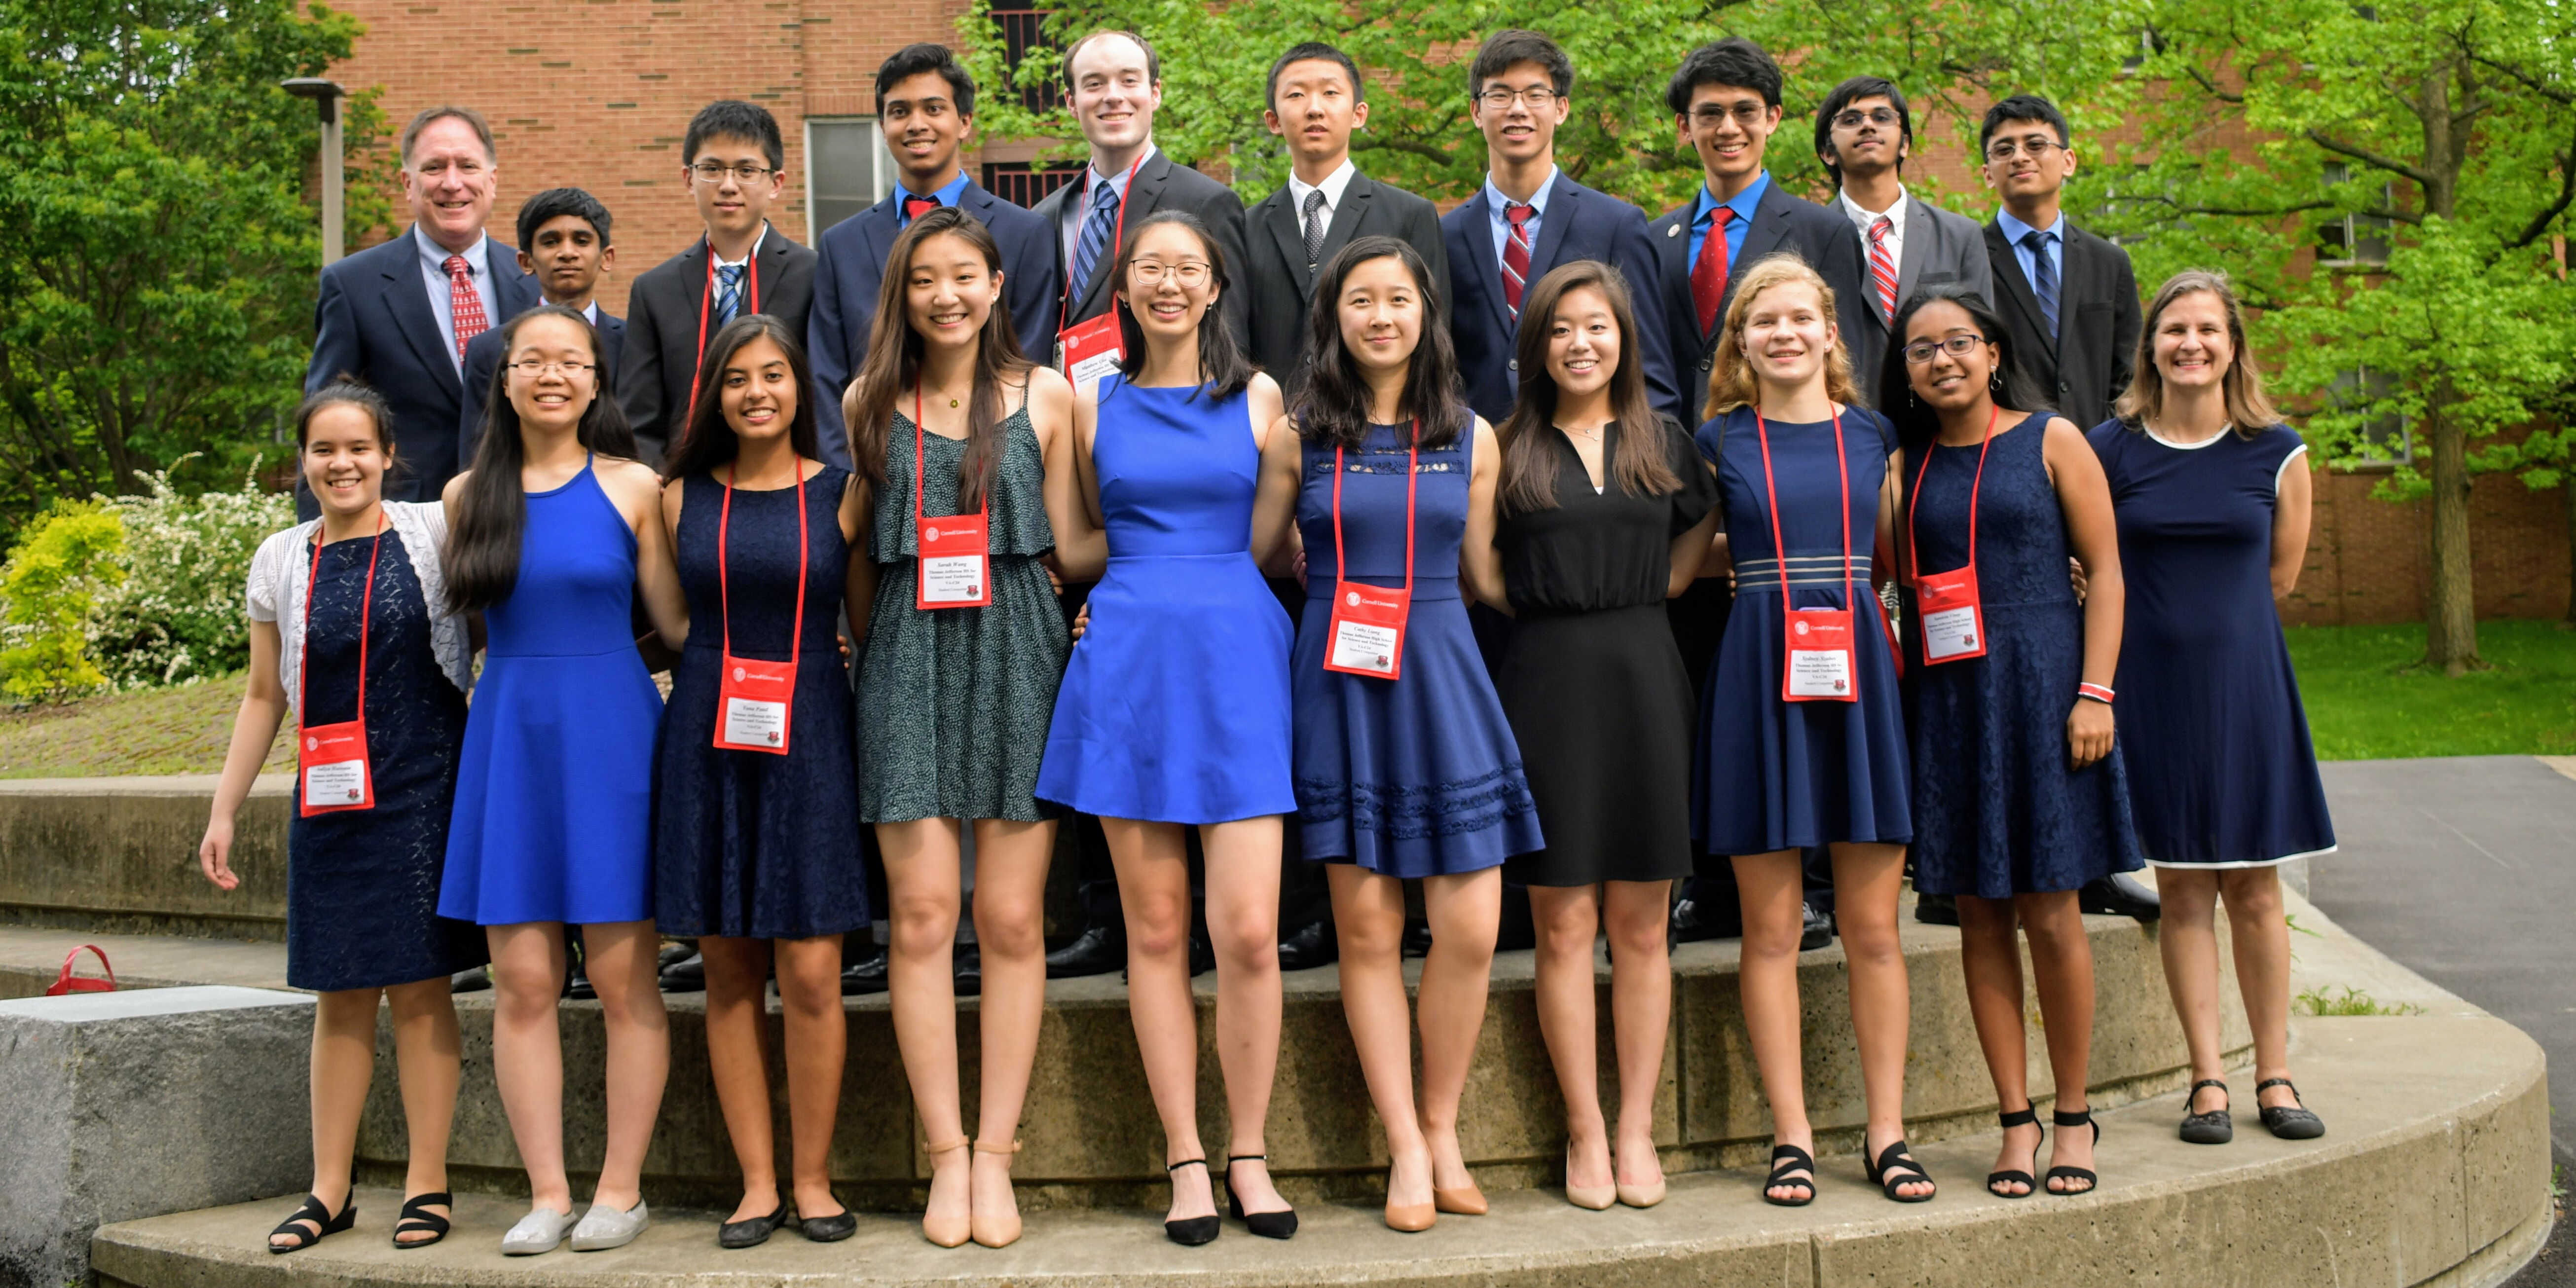 Our 2019 states team at the Science Olympiad National Tournament